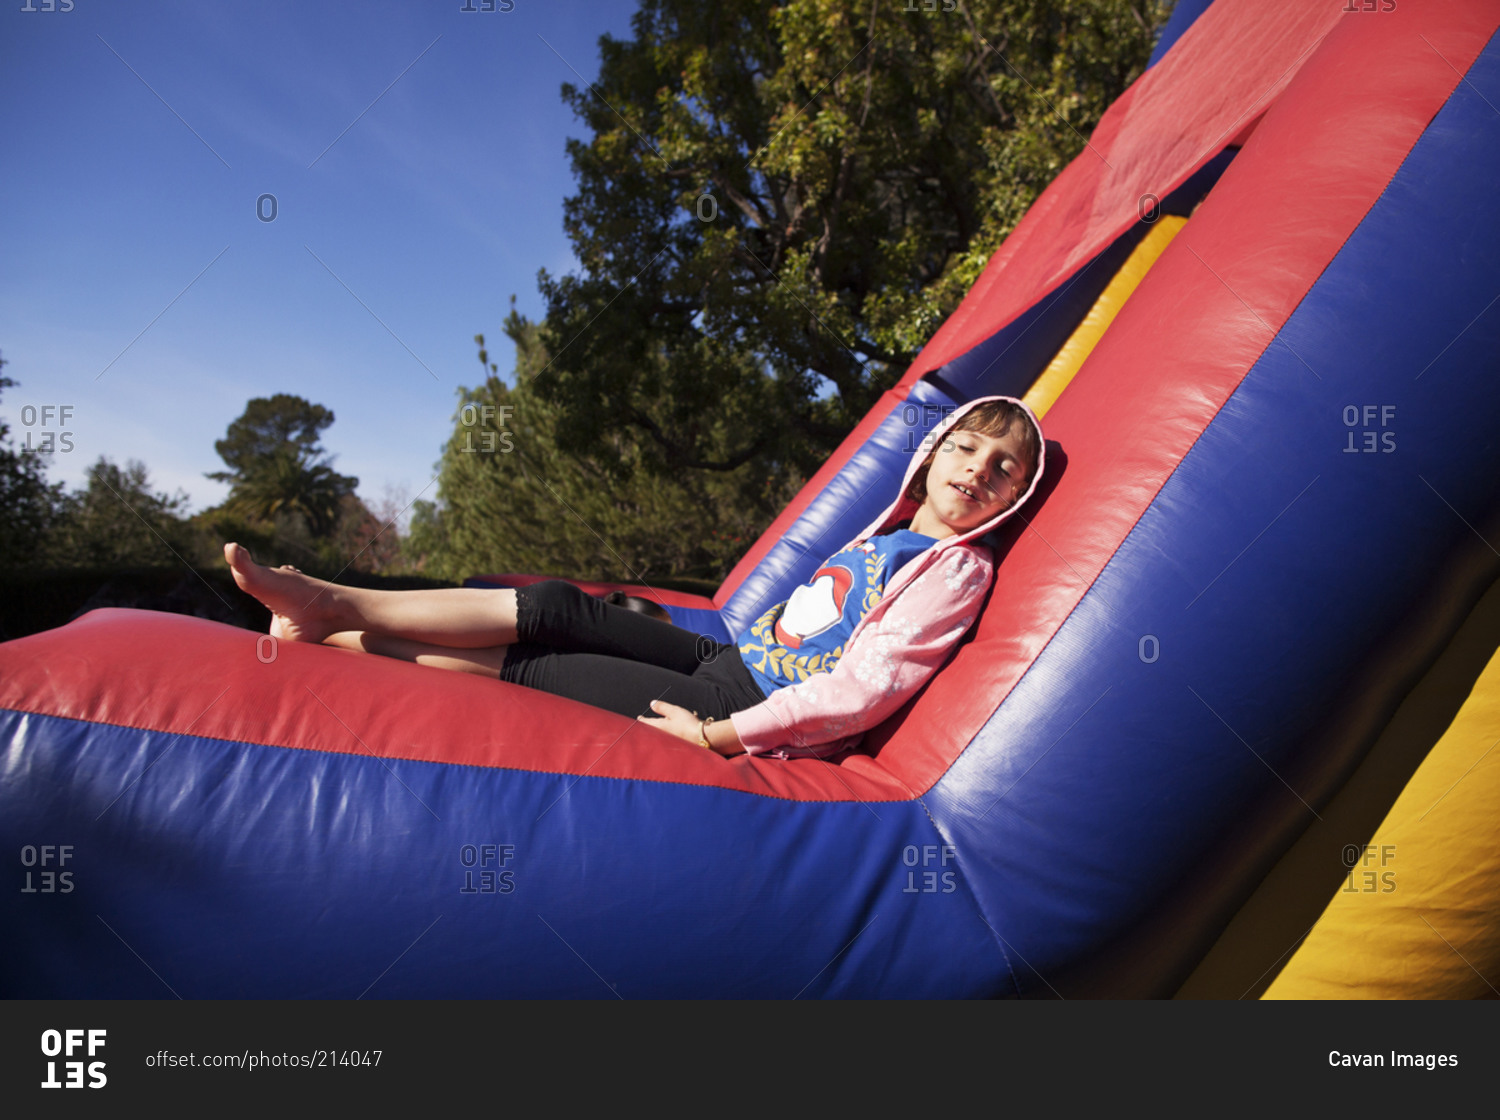 Young girl relaxing in the sun on a bounce house